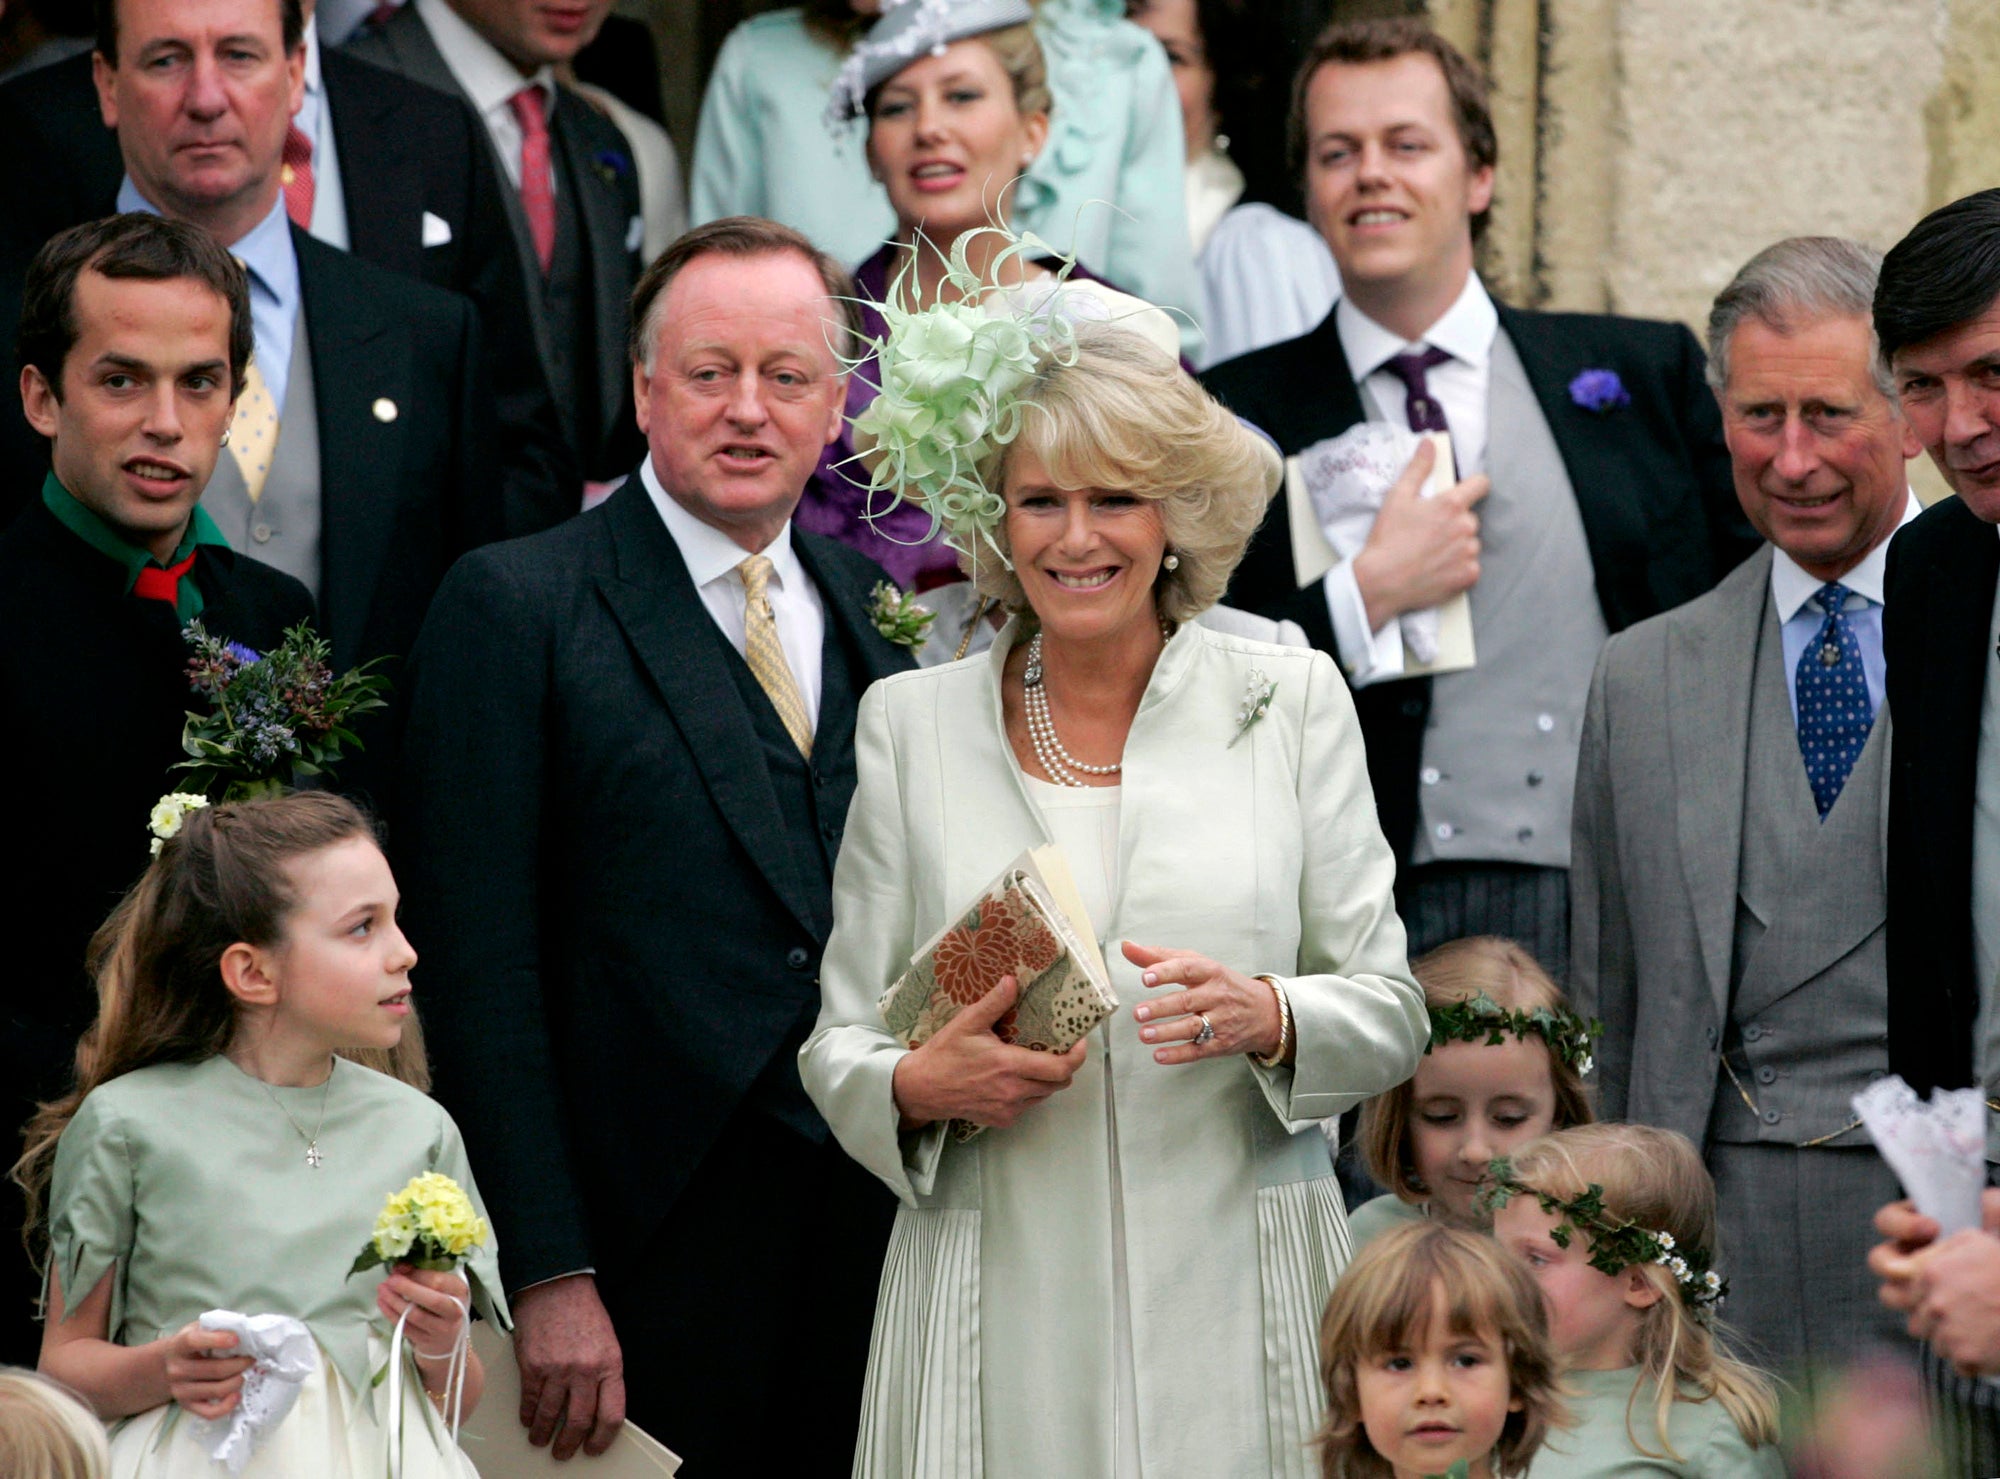 Camilla’s Pages of Honour will include her three grandsons